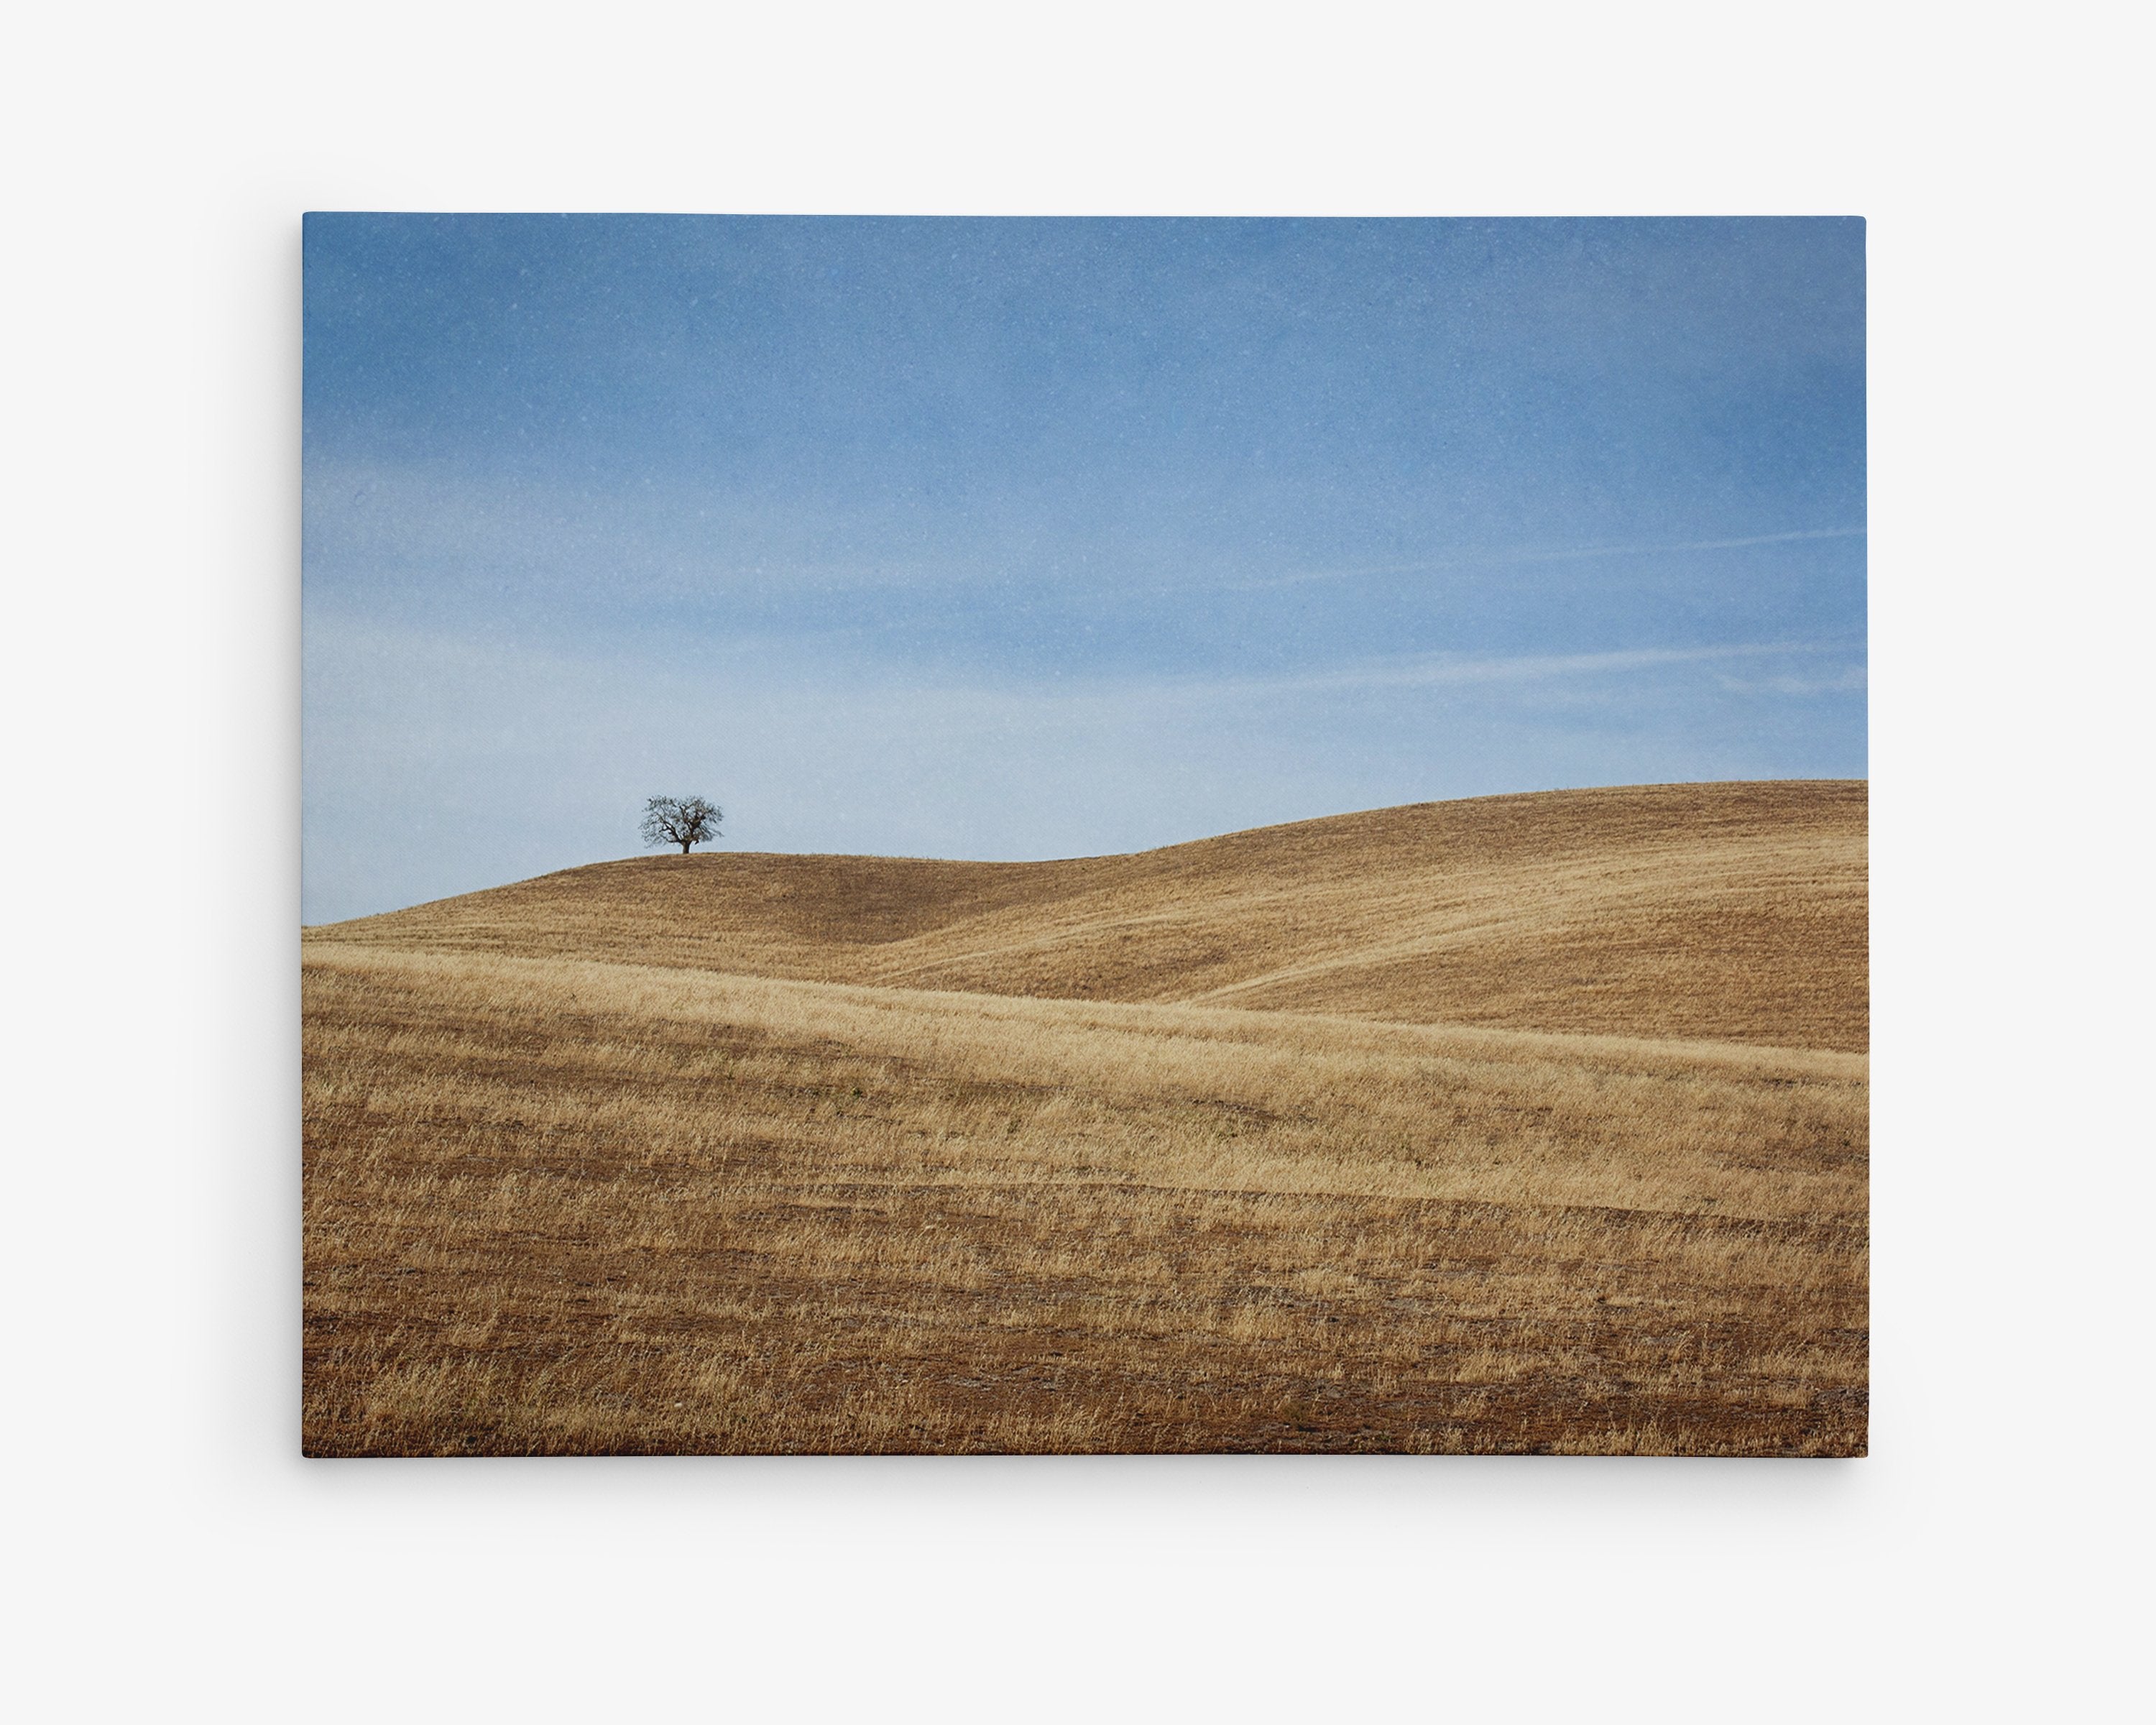 rustic canvas print of a tree on a hill